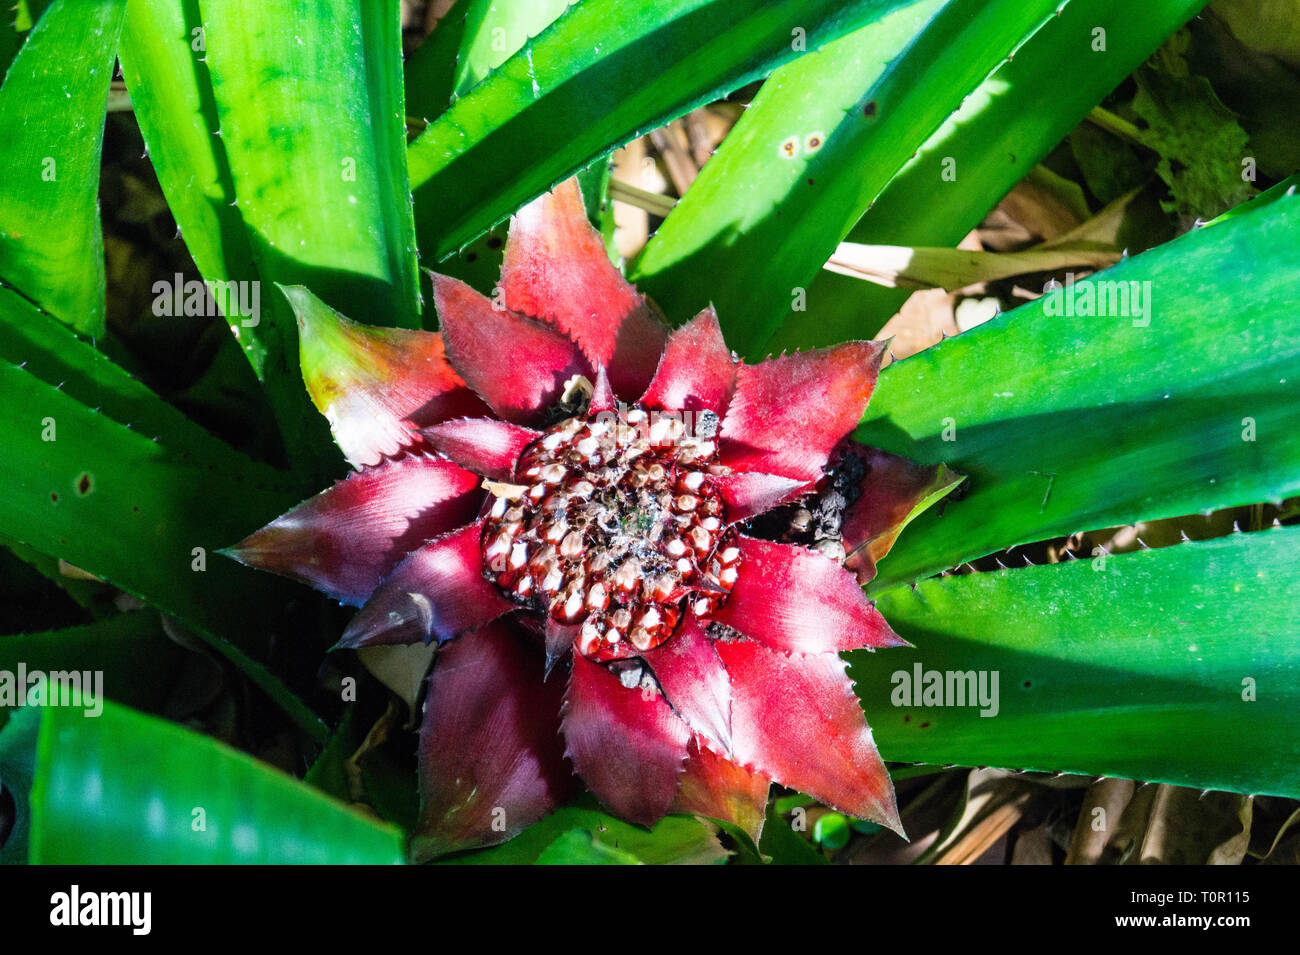 Canistrum giganteum Bromeliaceae Tropical flower from brazil Stock Photo